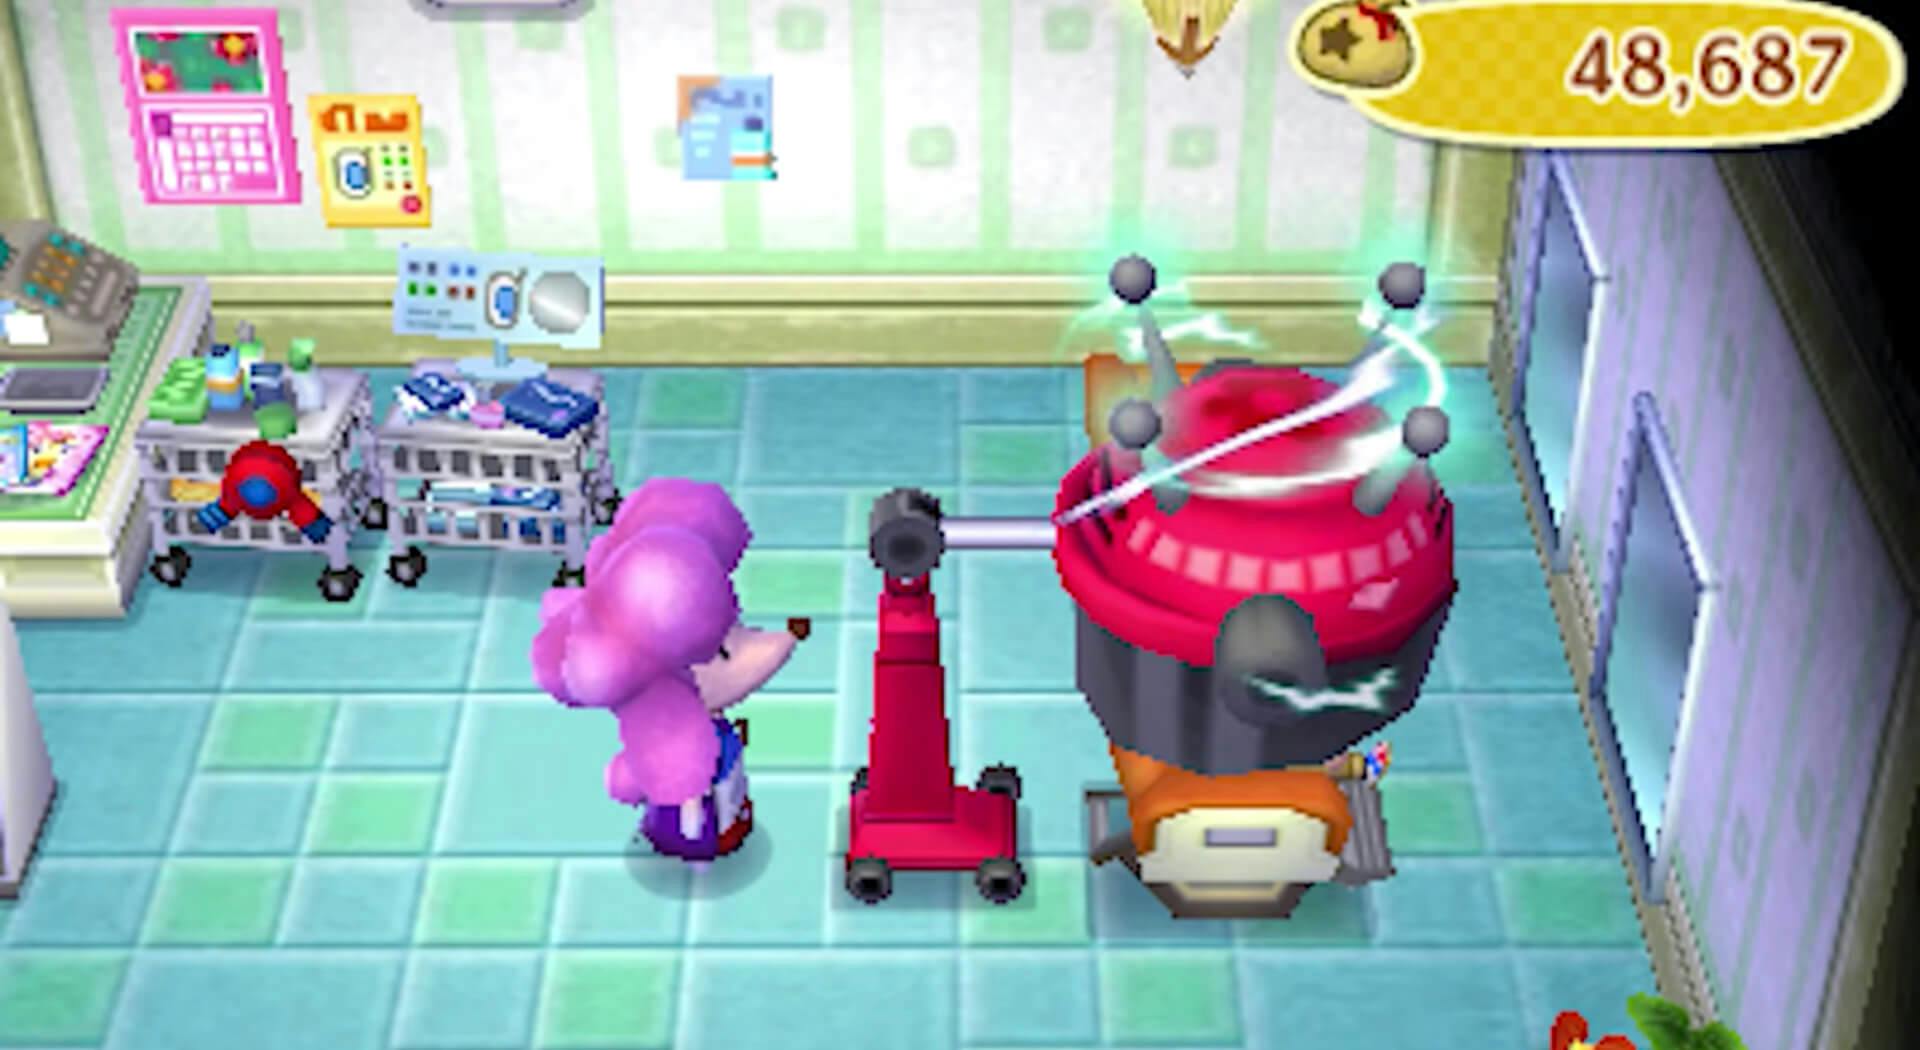 Photo of Shampoodle's hair salon which demonstrates how to change your makeup color in Animal Crossing: New Leaf.